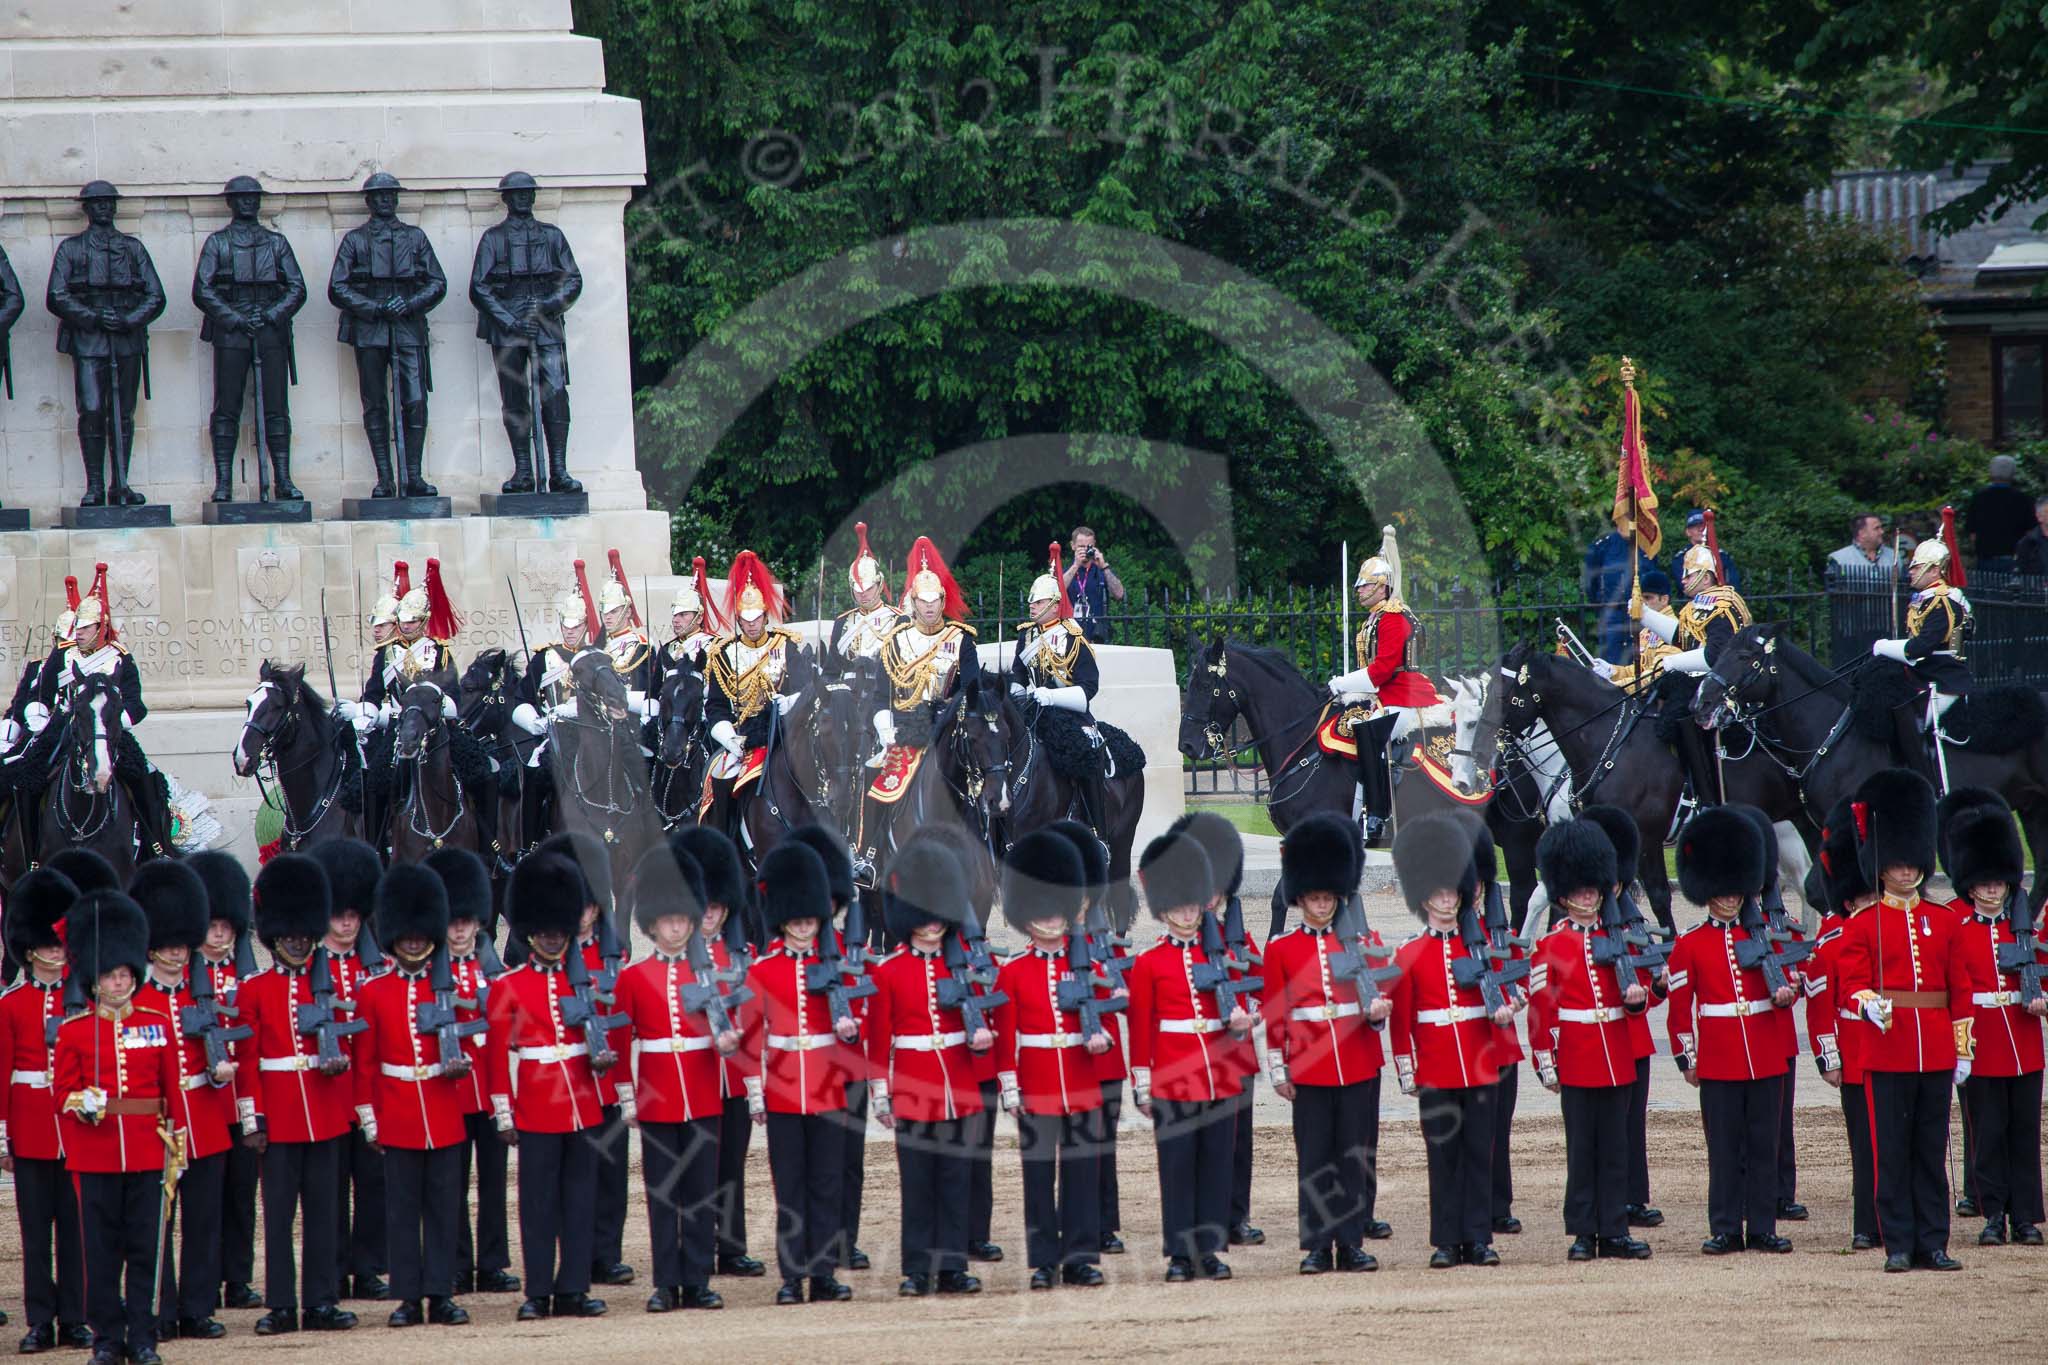 Trooping the Colour 2012: The Ride Past: TheBlues and Royals, in position again at the St. James's Park side and in front of the Guards Memoria after the Ride Past..
Horse Guards Parade, Westminster,
London SW1,

United Kingdom,
on 16 June 2012 at 12:01, image #606